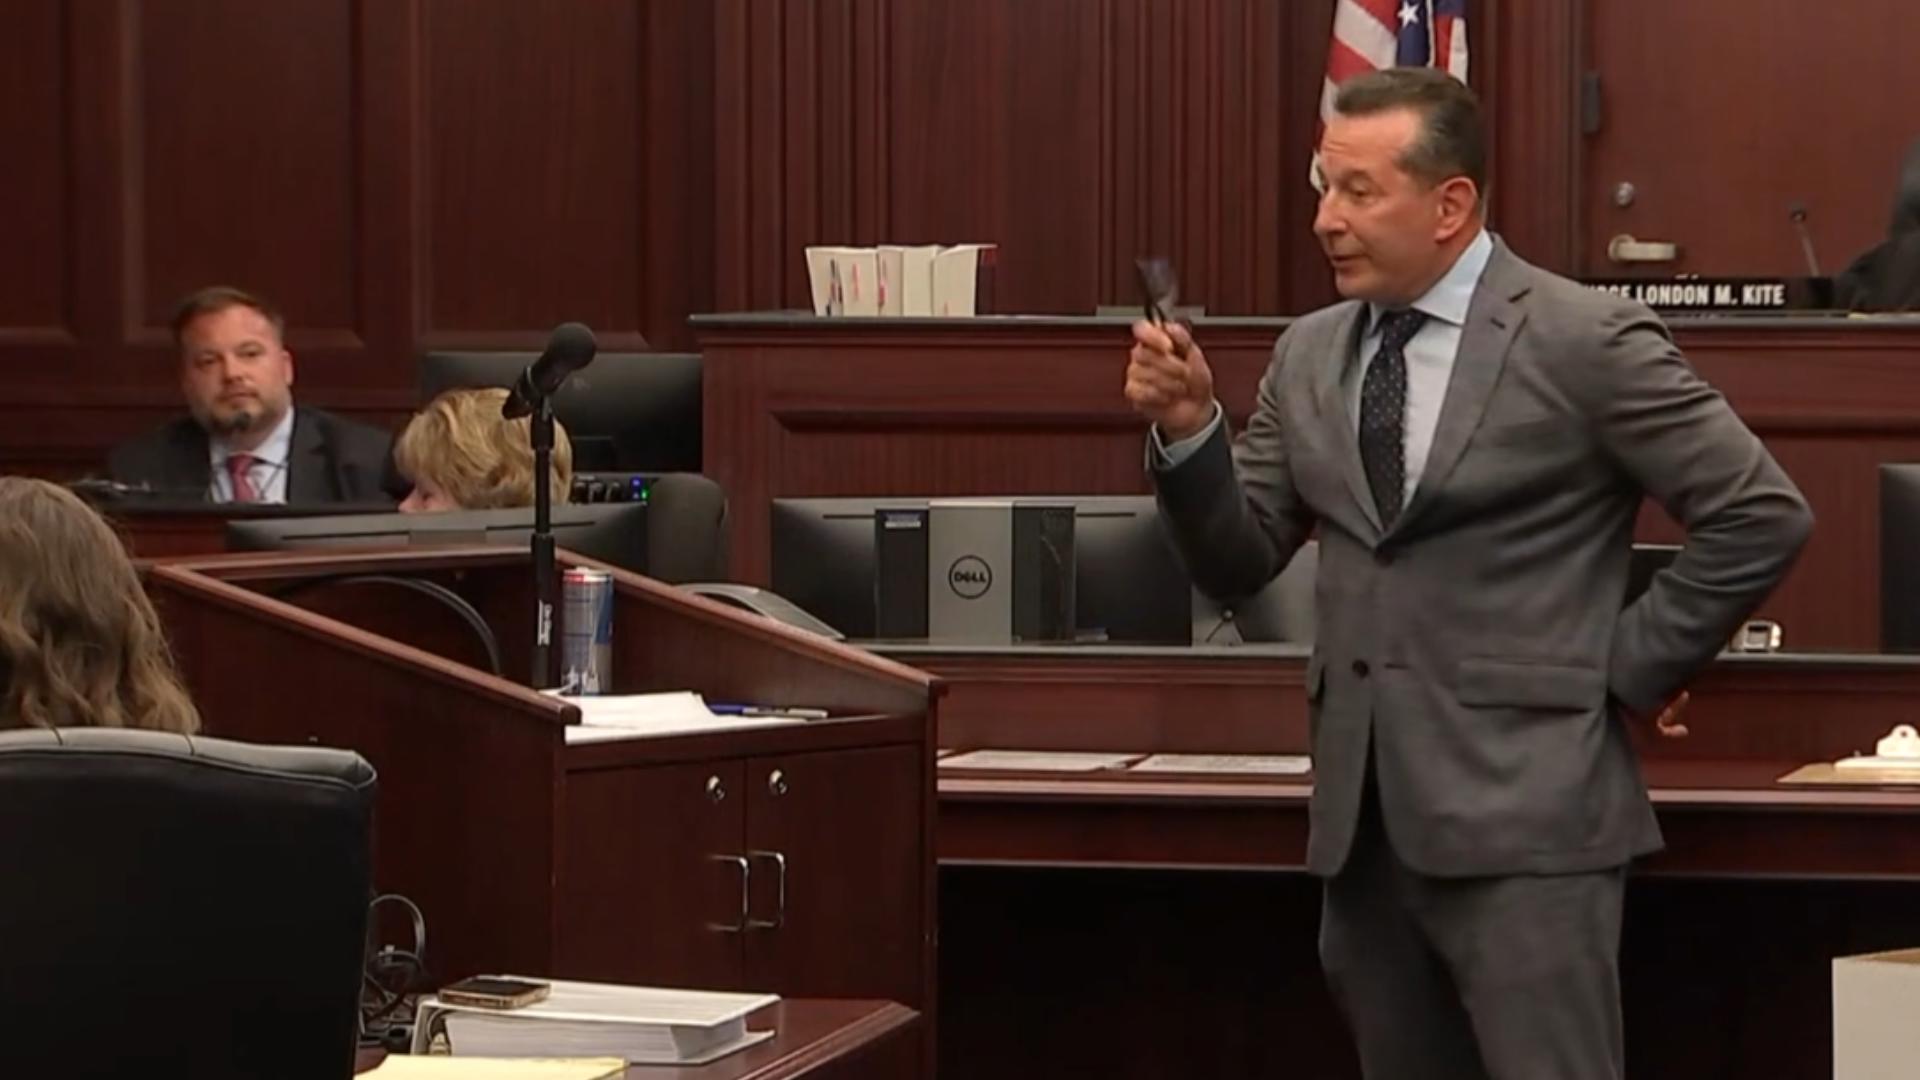 Excerpt from Shanna Gardner's bond hearing in which Jose Baez grills the lead detective on how he handled evidence in the case.